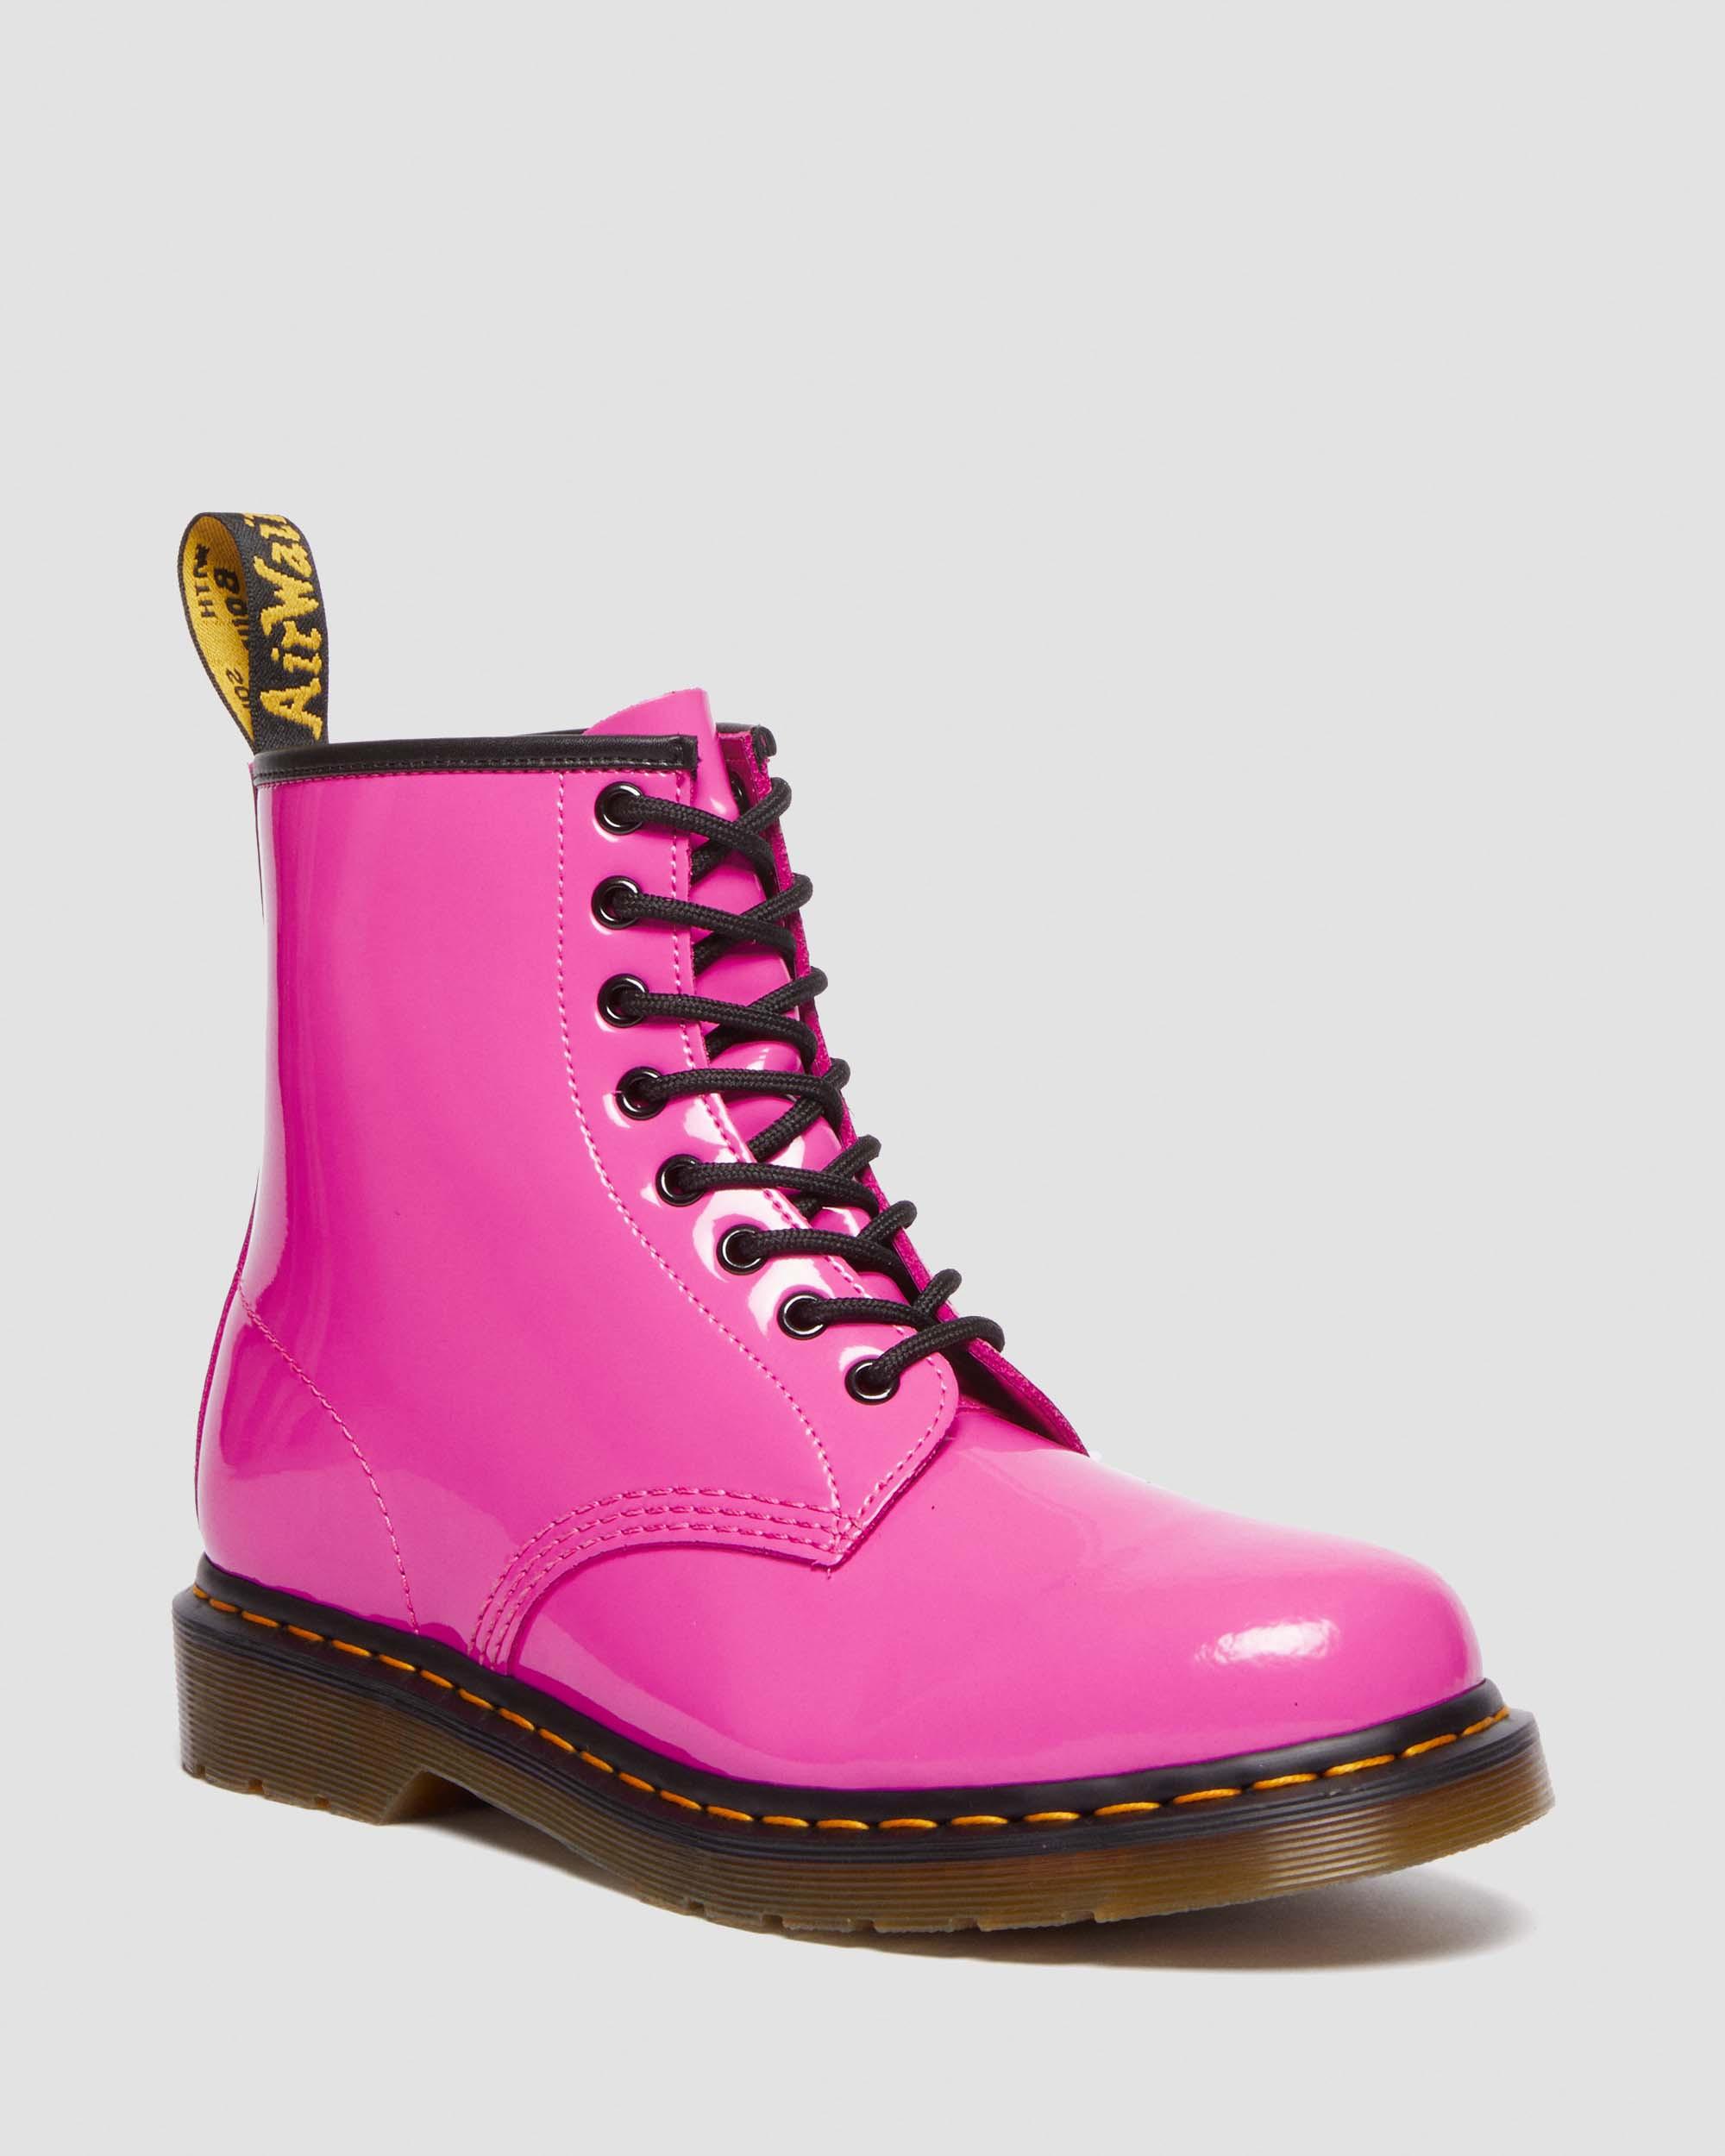 1460 Women's Patent Leather Lace Up Boots in Thrift Pink | Dr. Martens